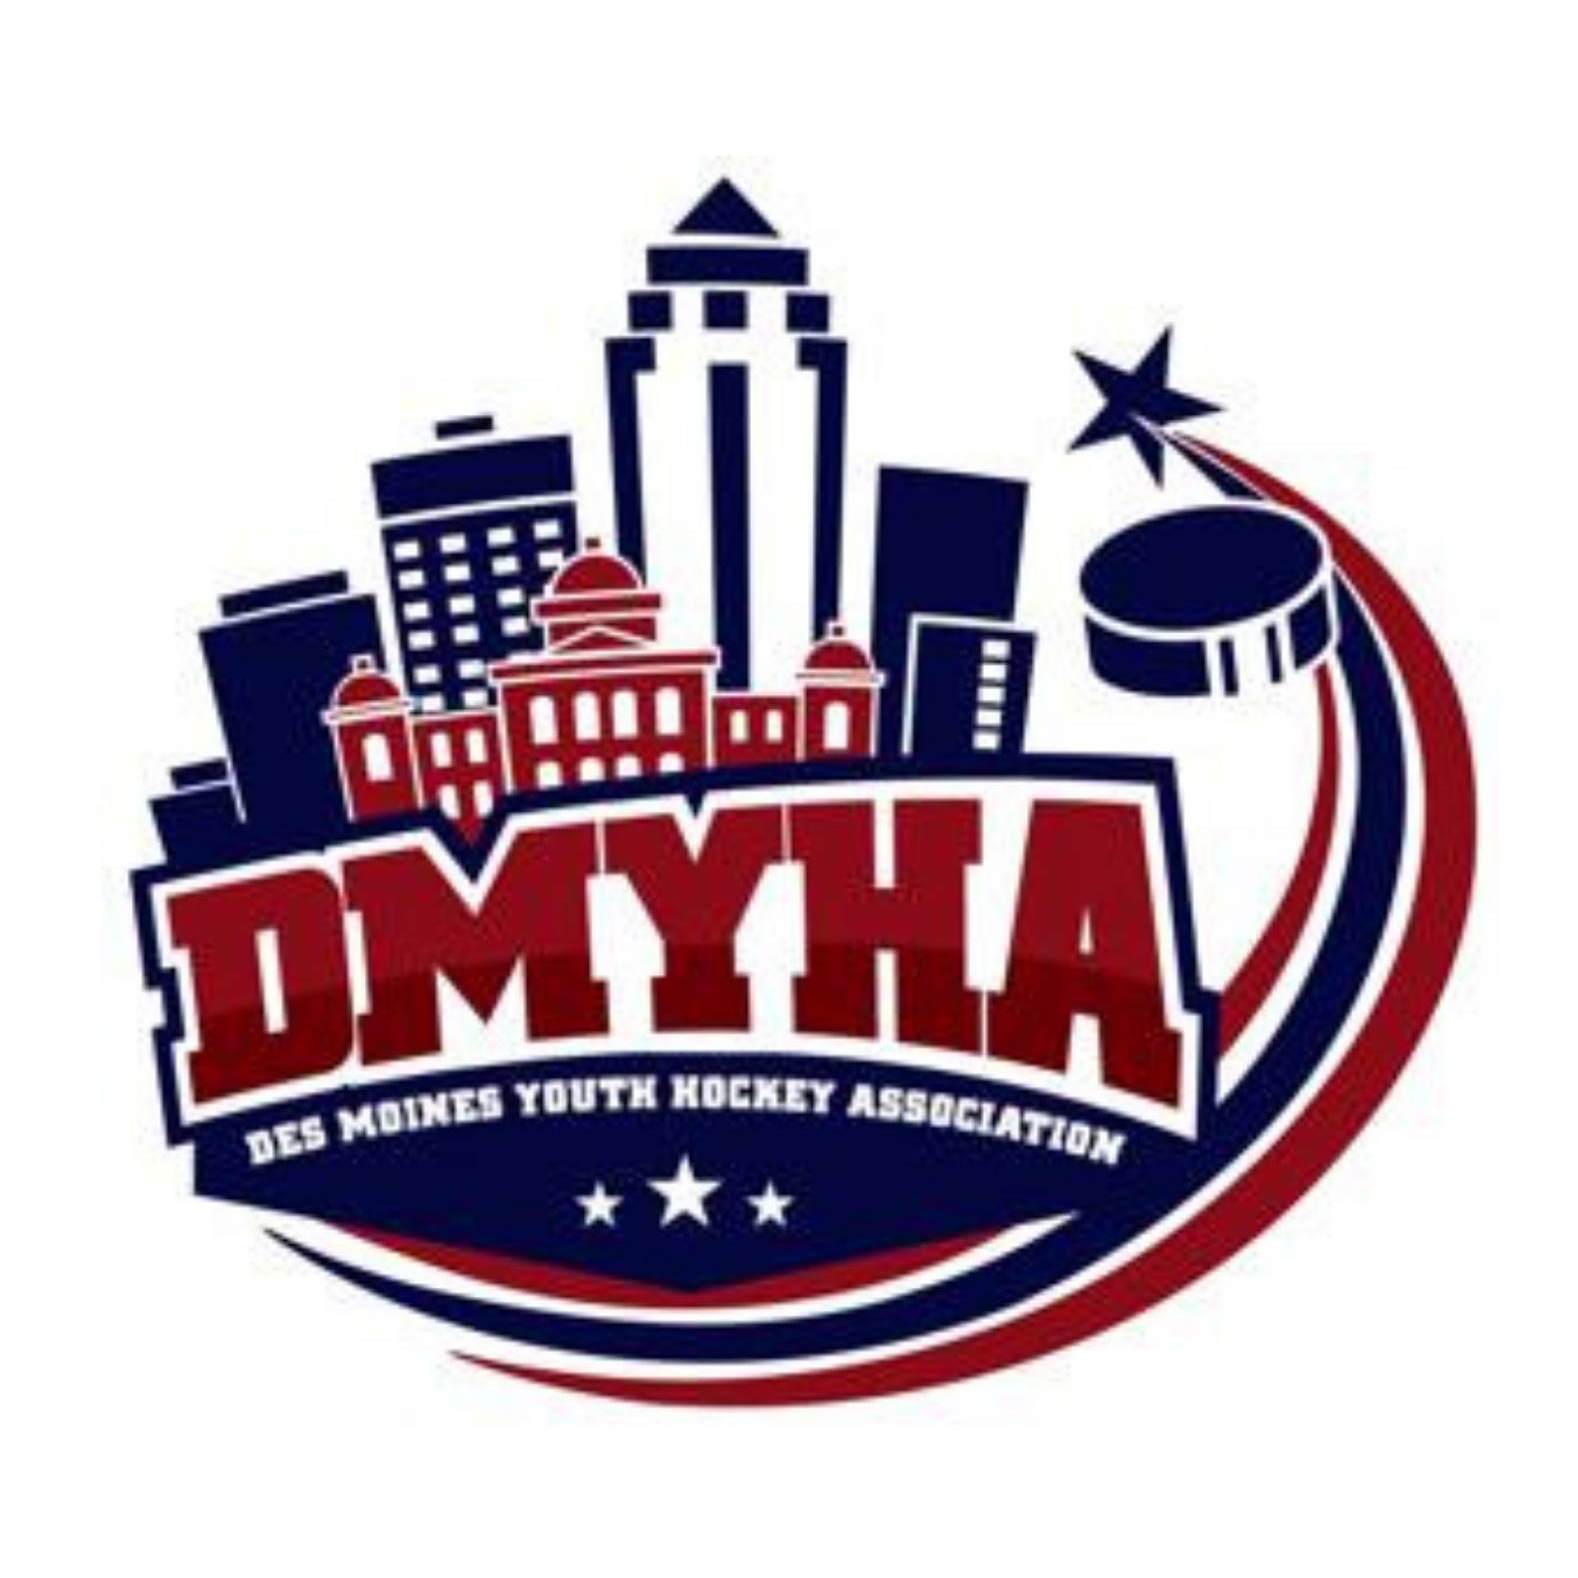 Des Moines Youth Hockey Association